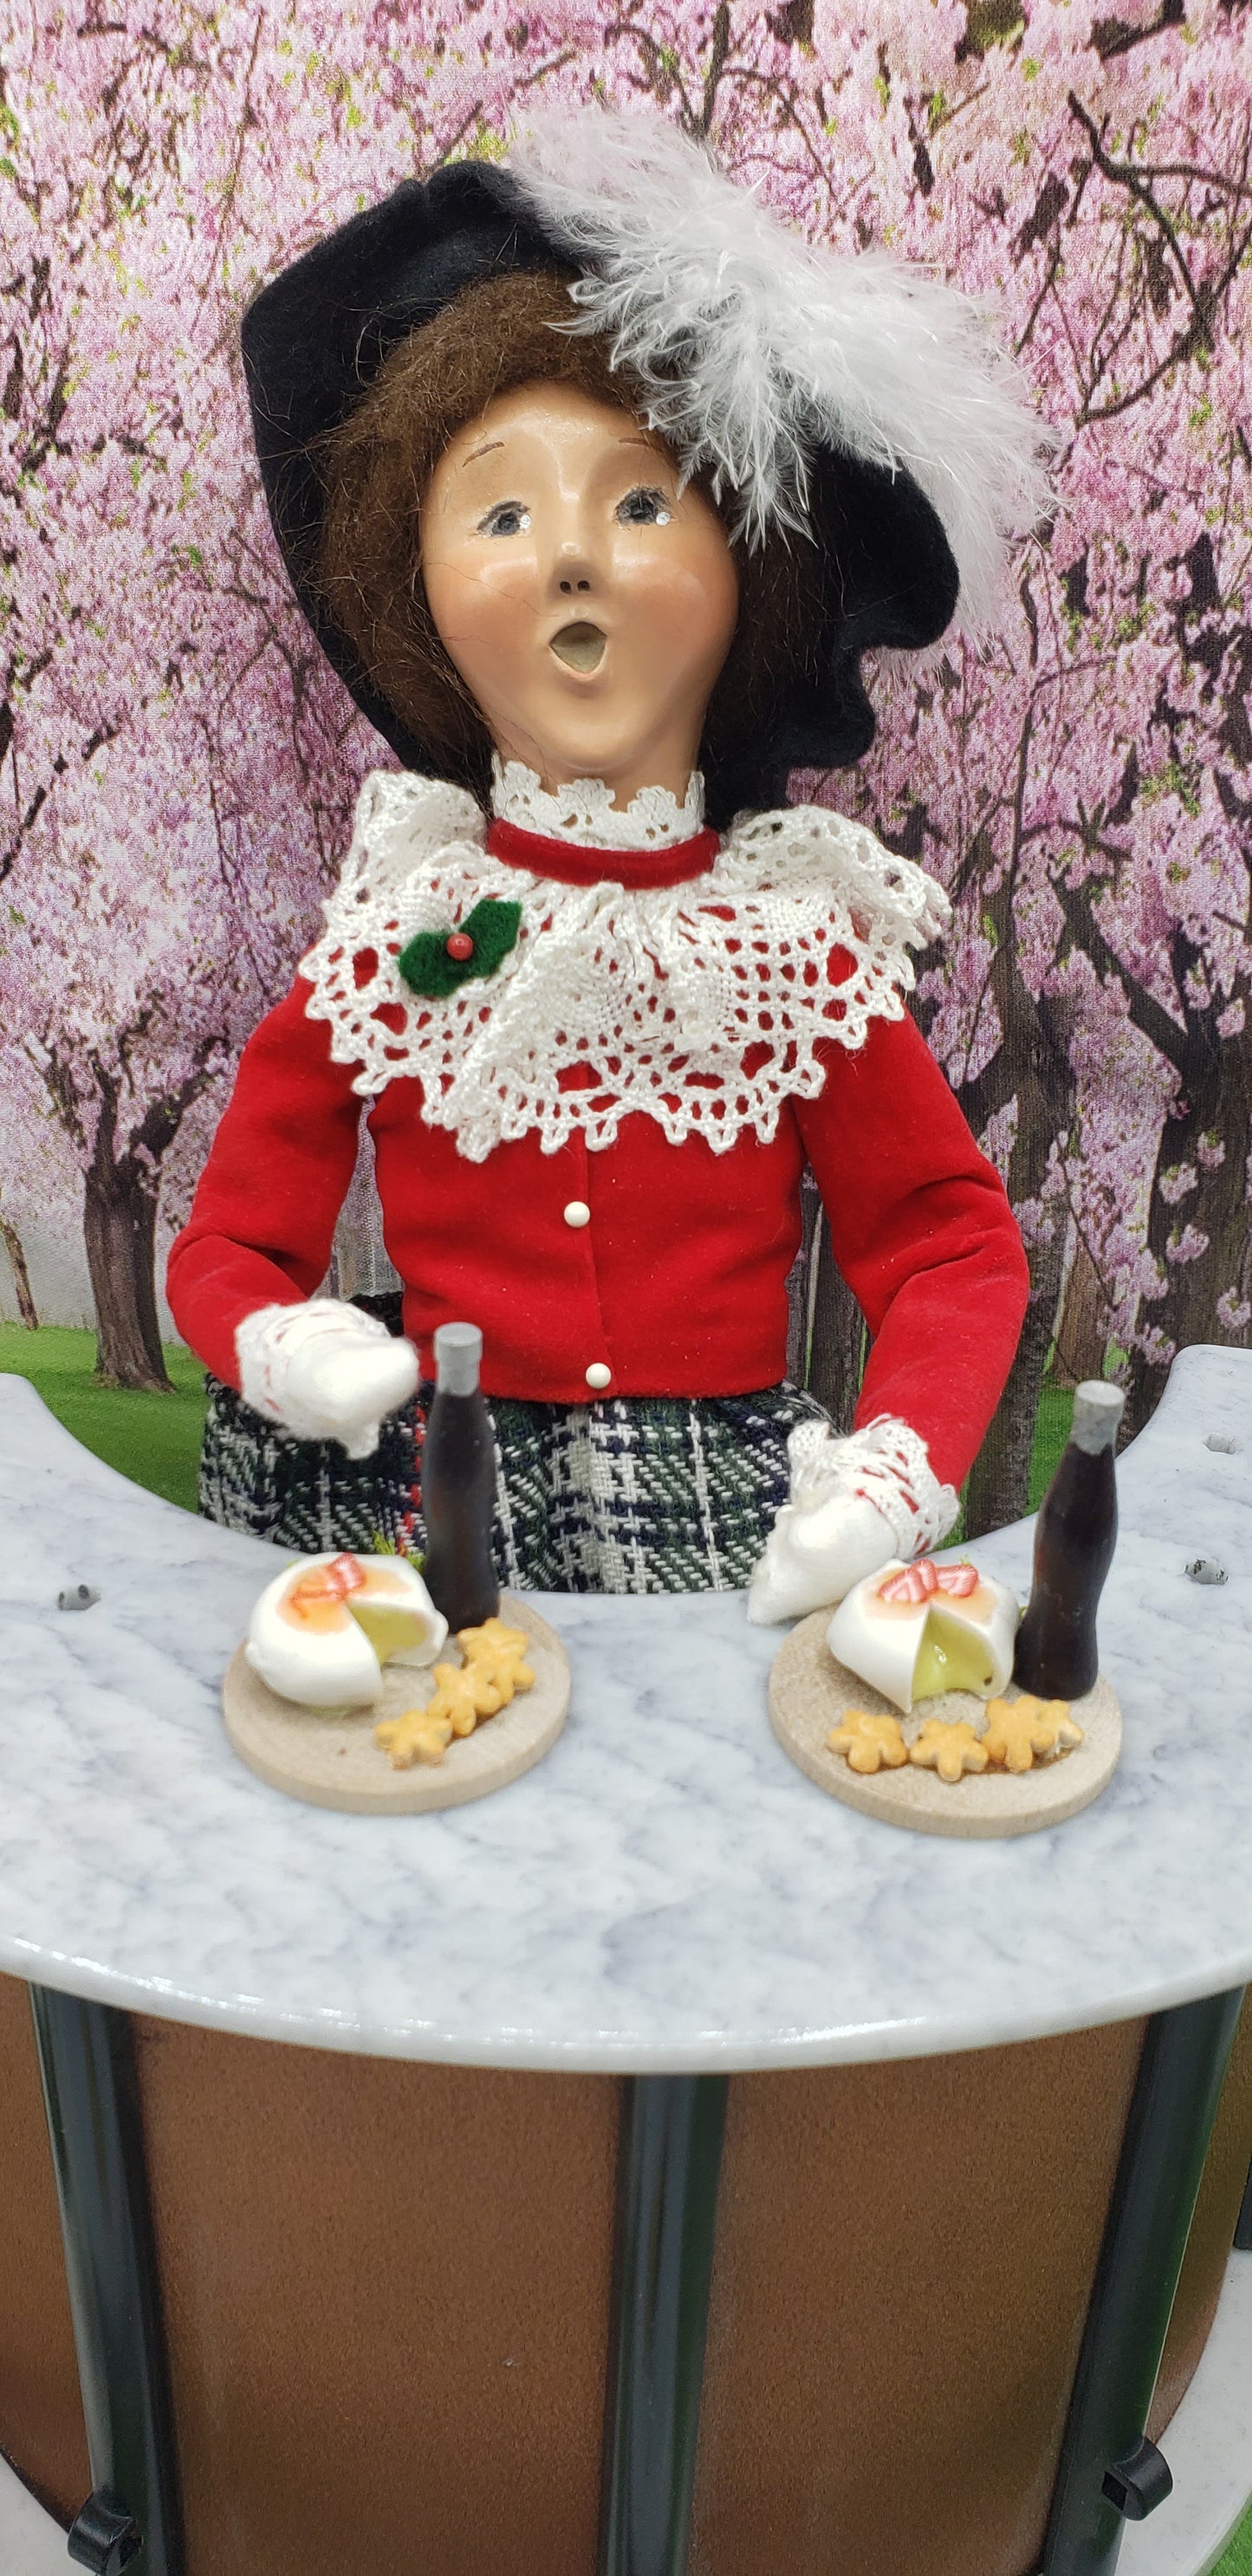 byers' choice doll with round platters